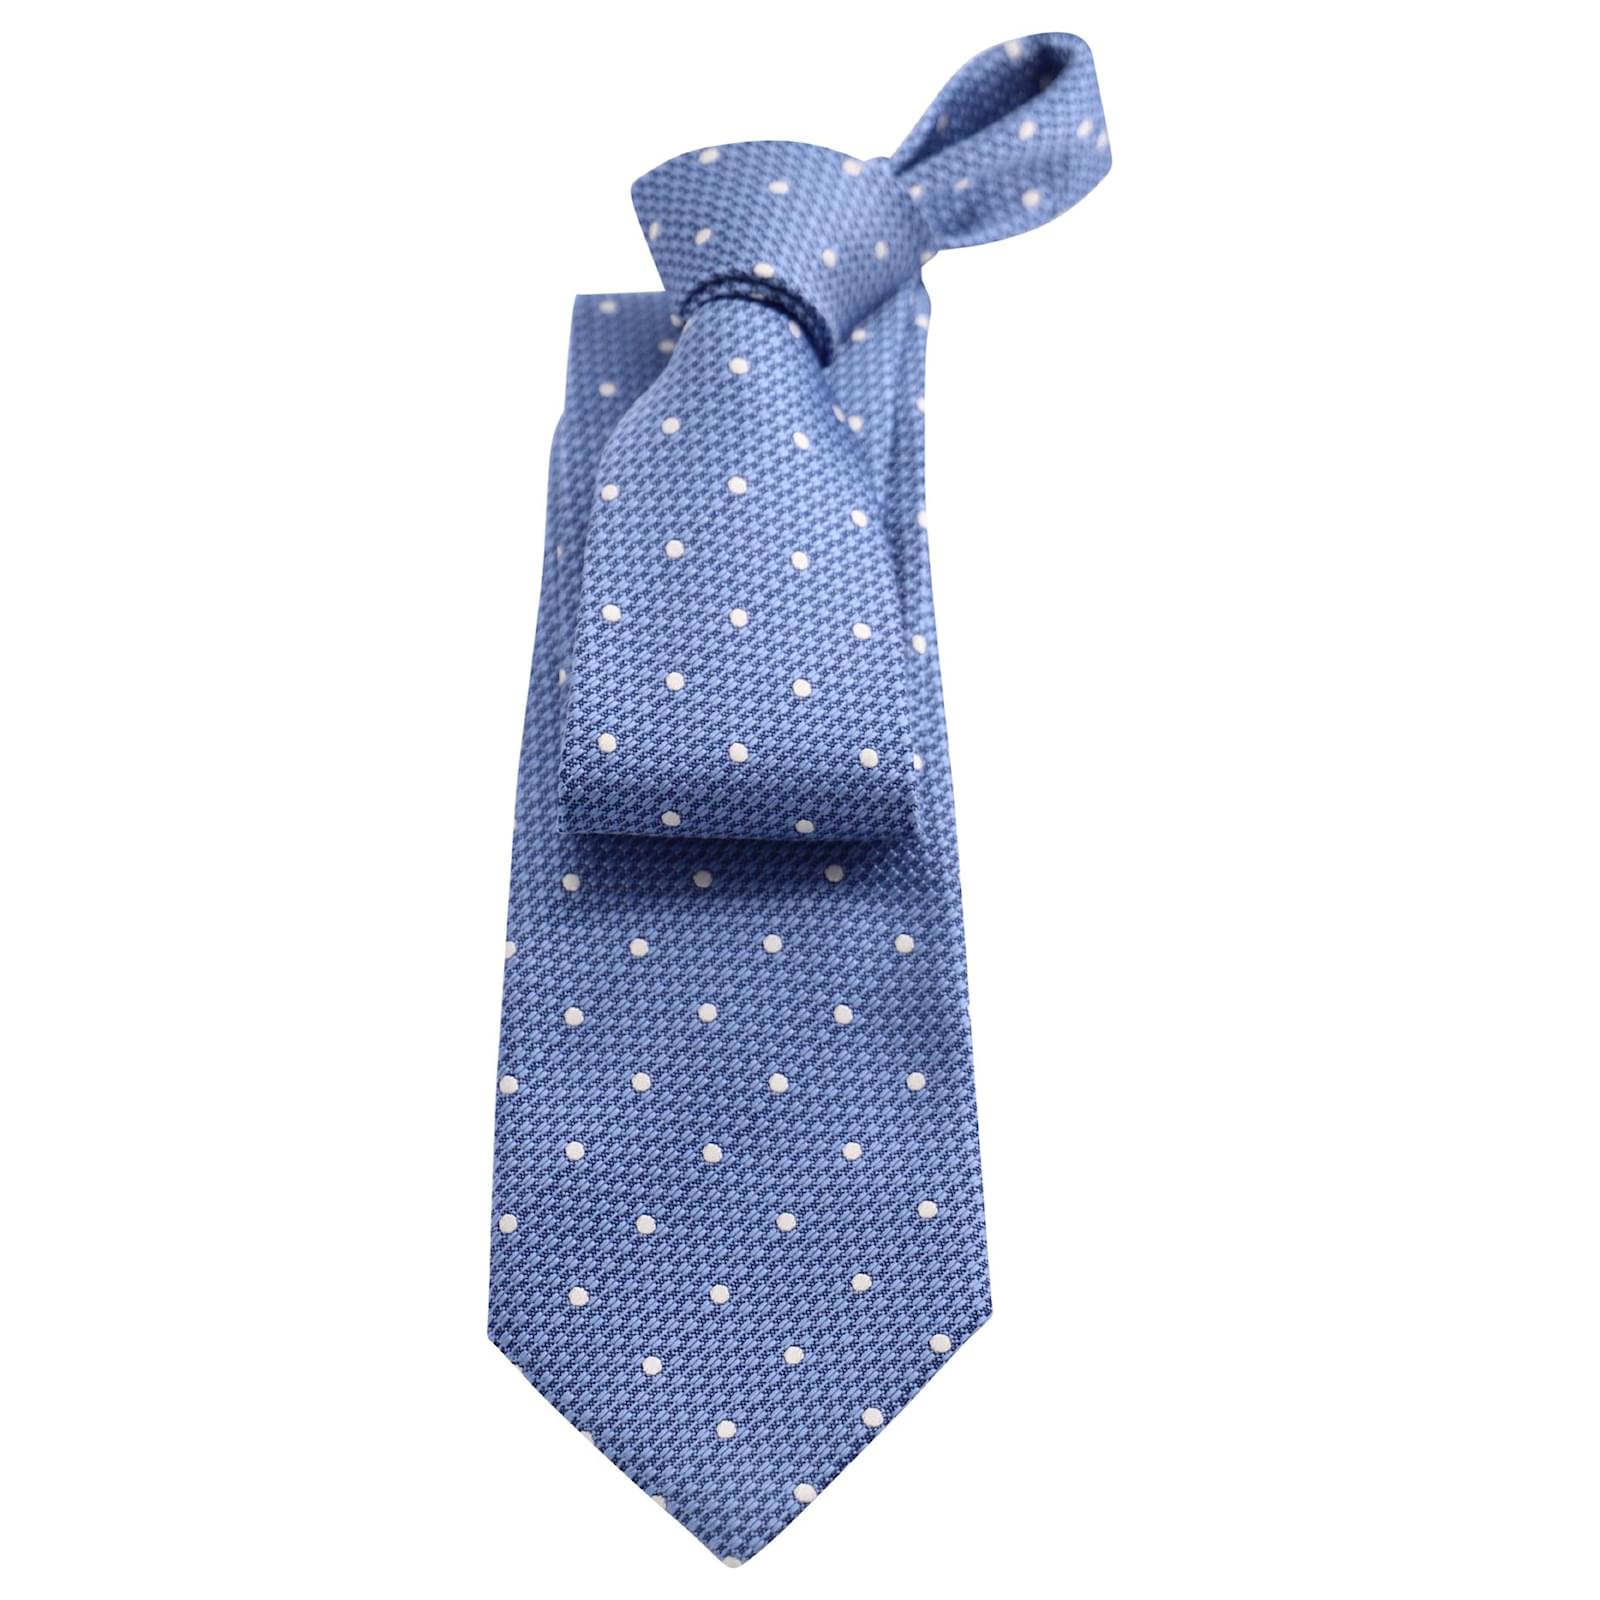 Tom Ford Blue Silk Tie - Blue Ties, Suiting Accessories - TOM132204